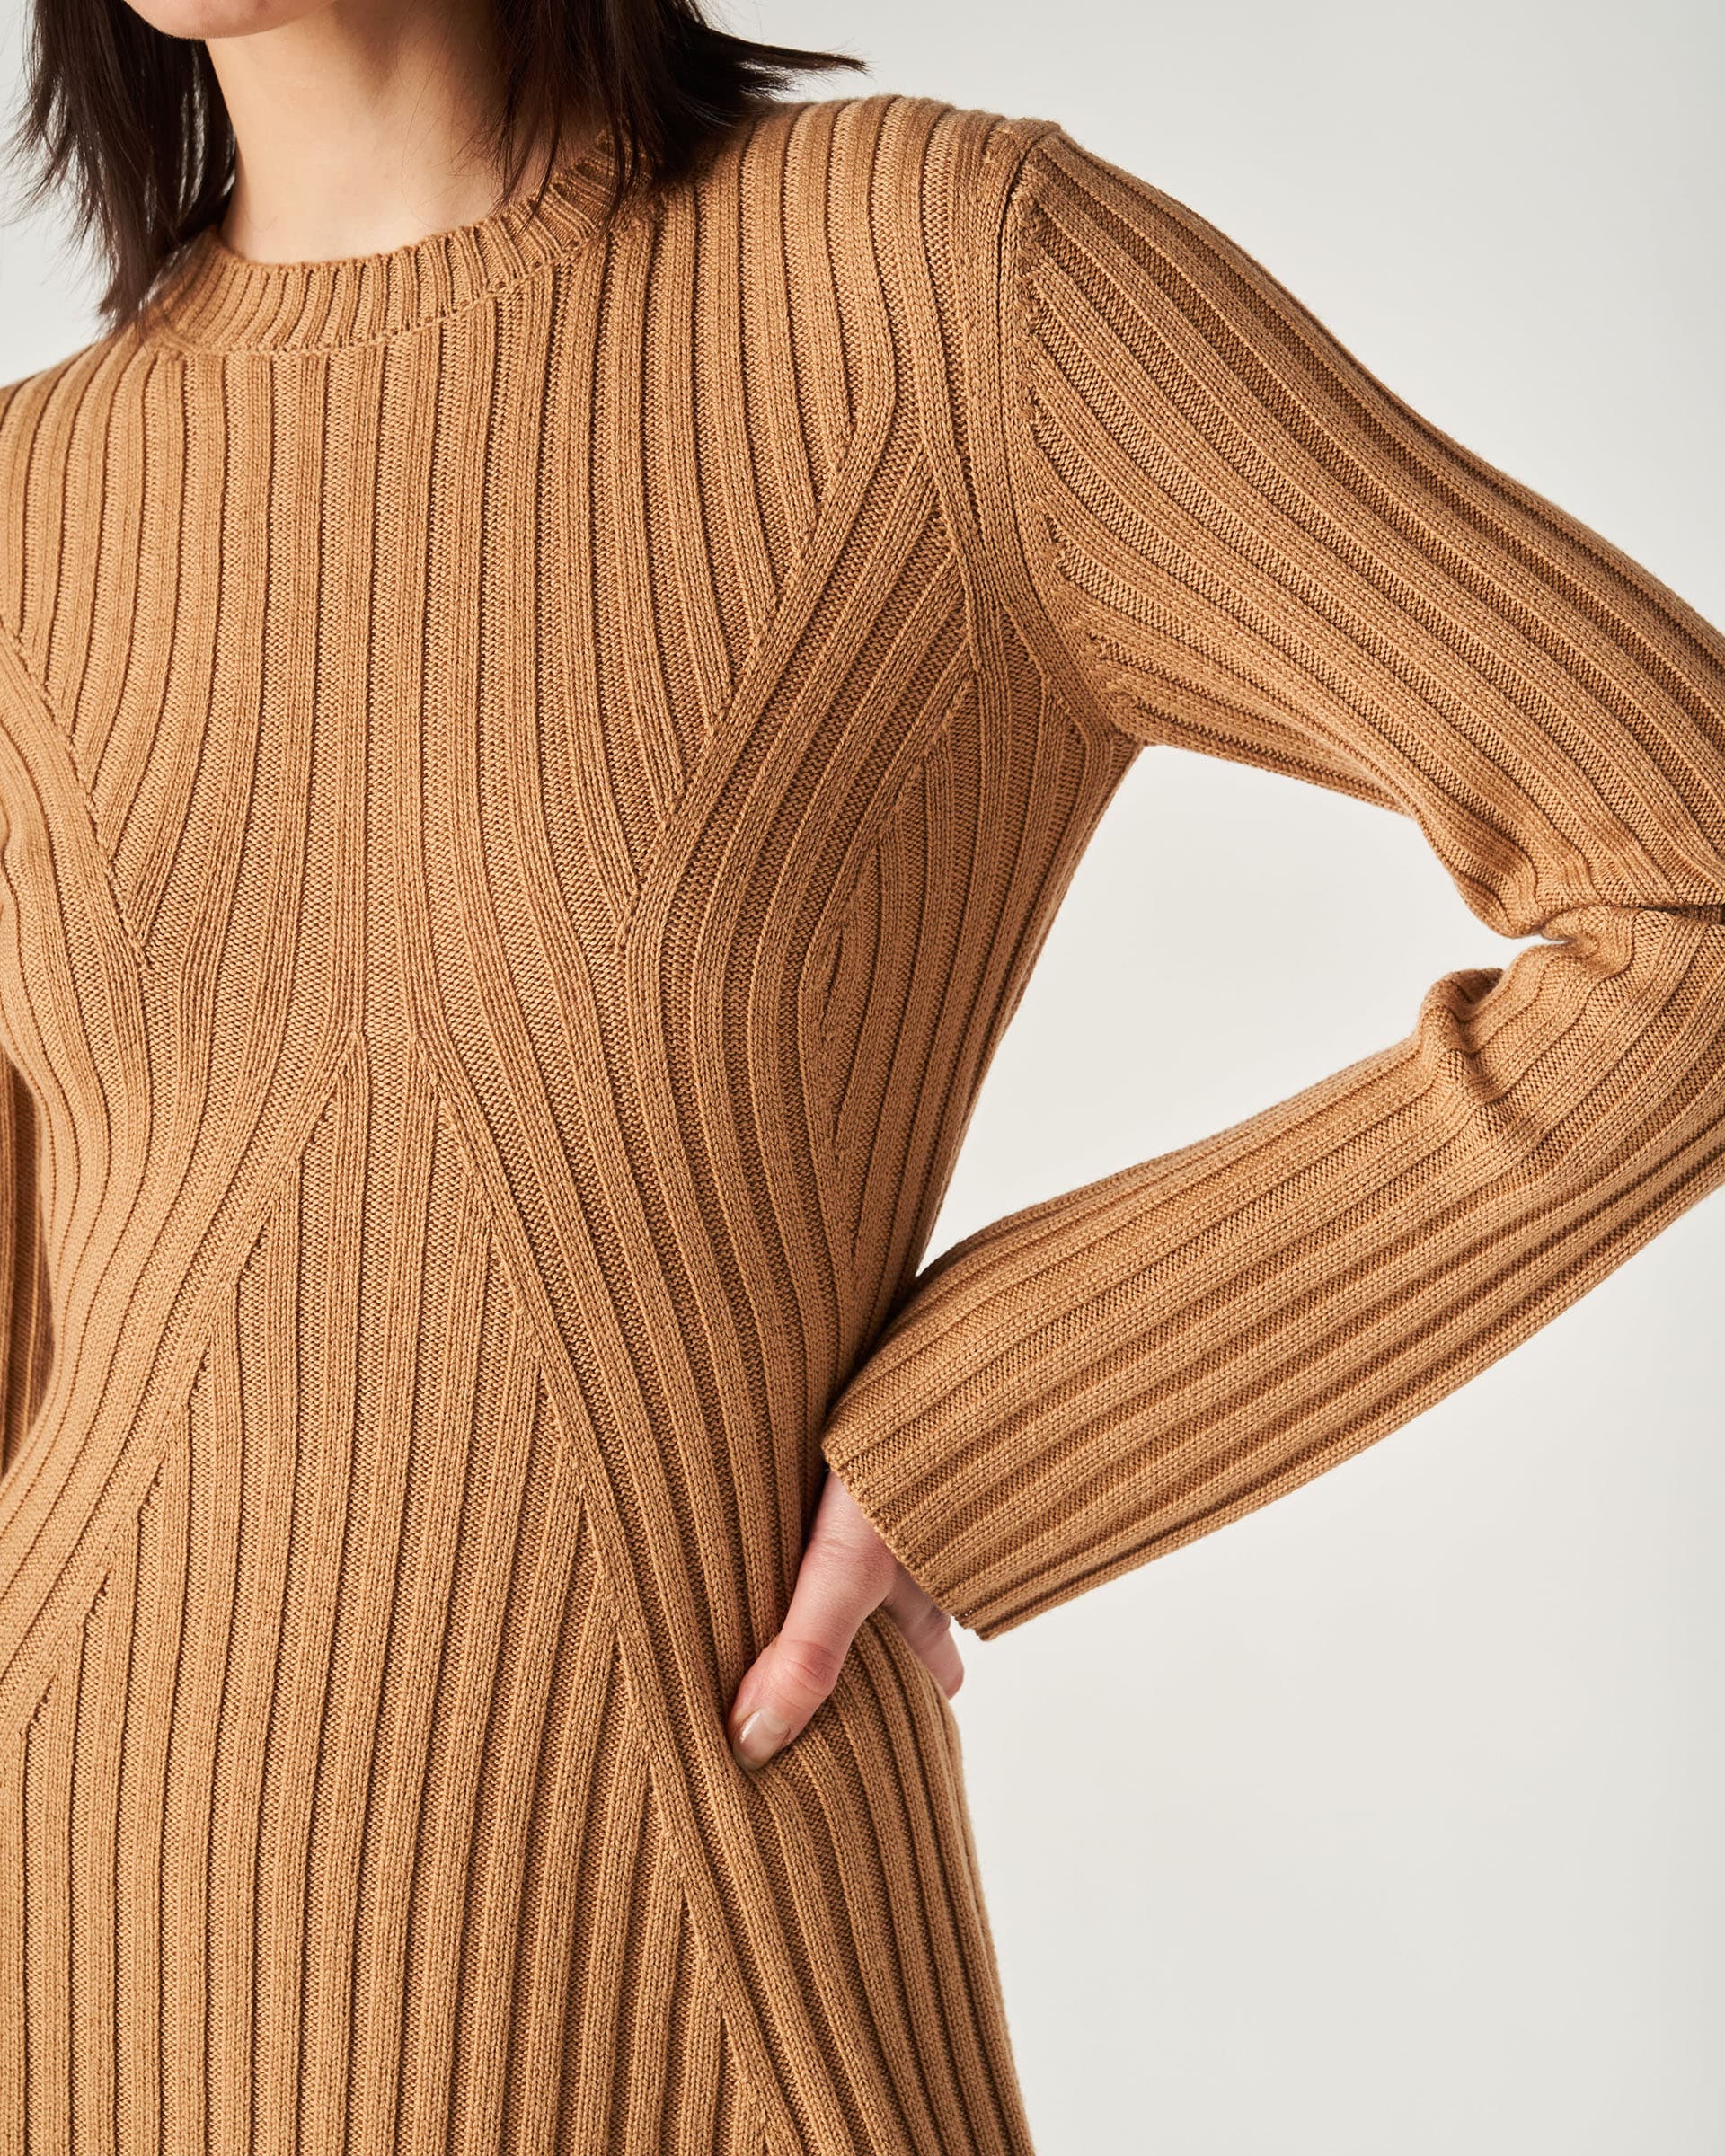 The Market Store | Ribbed Knit Dress